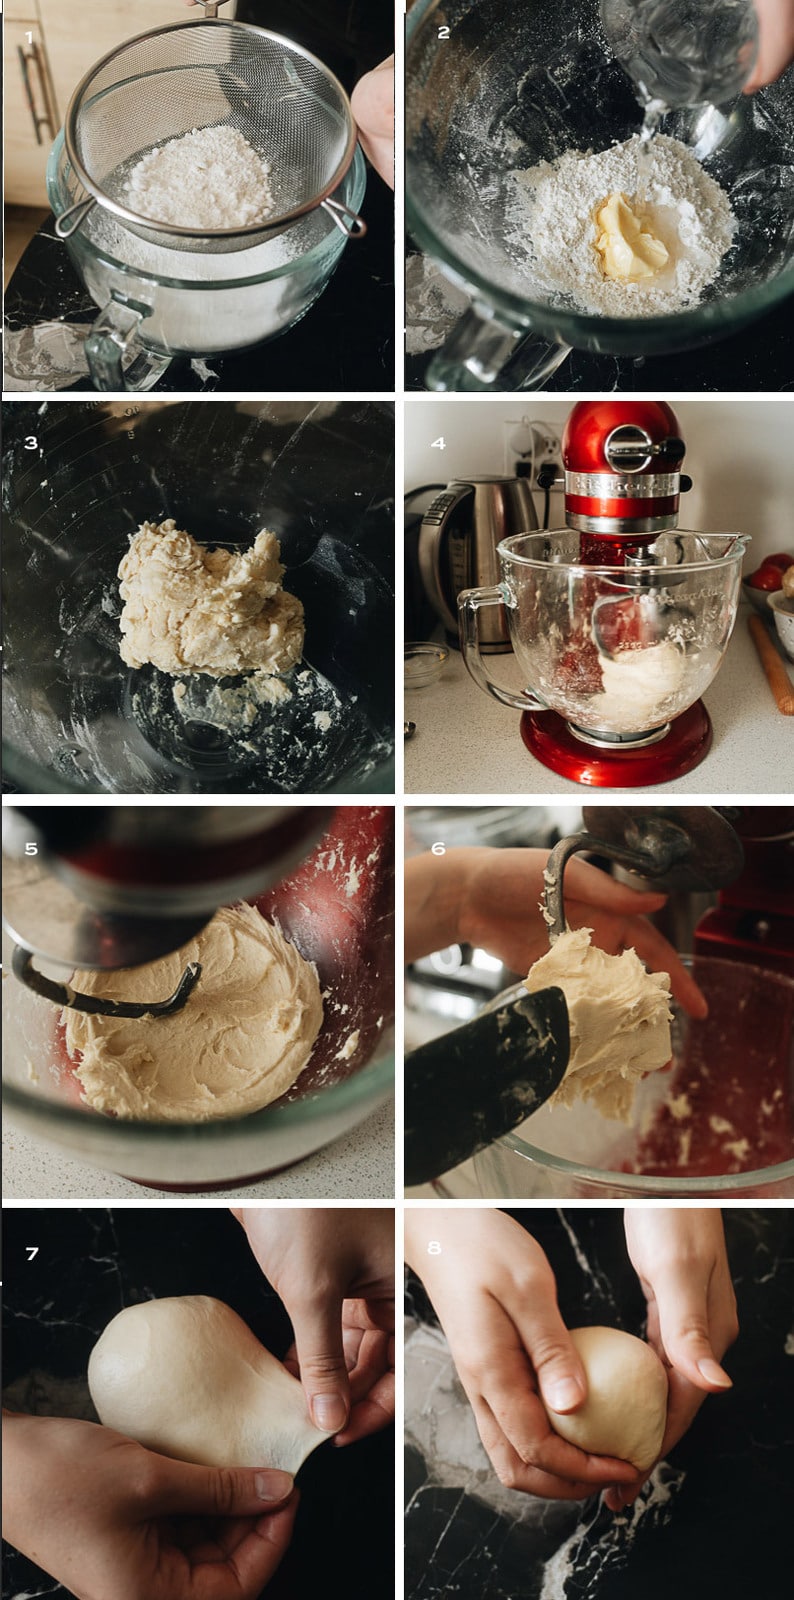 How to make water dough step-by-step